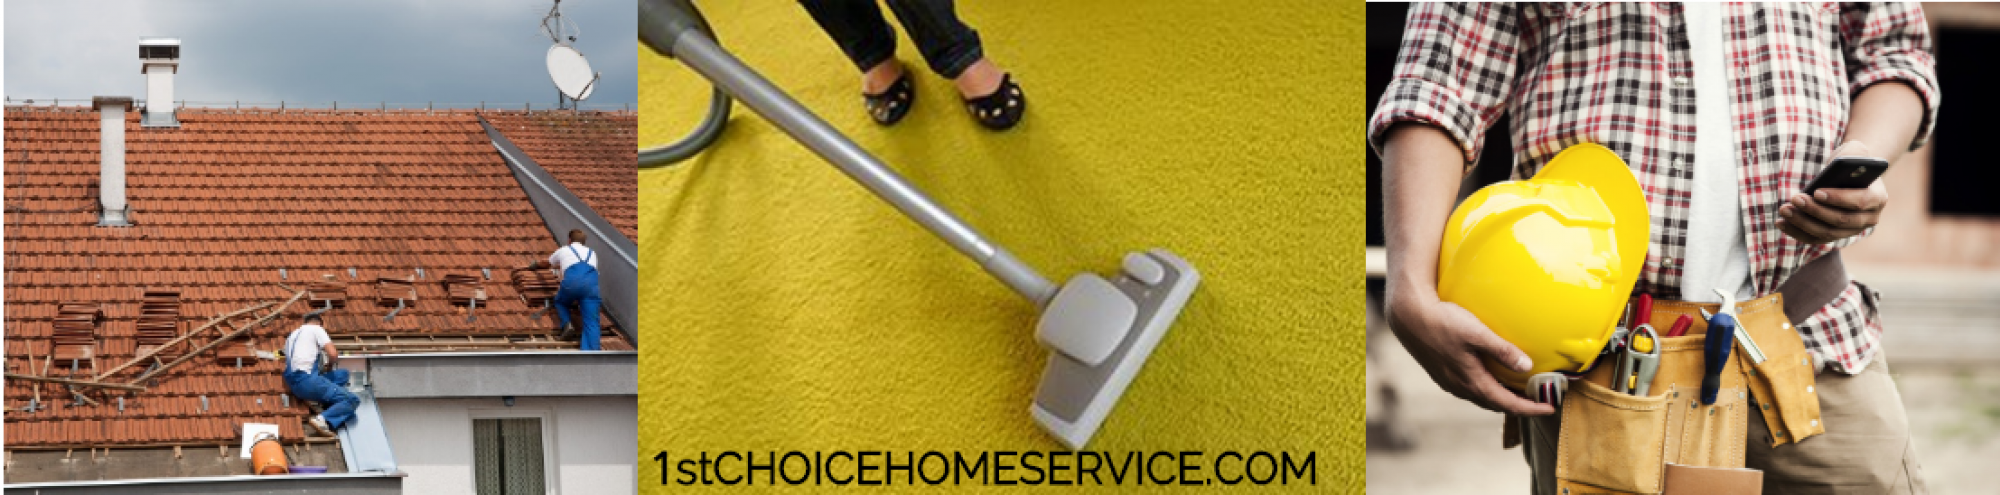 1stchoicehomeservice